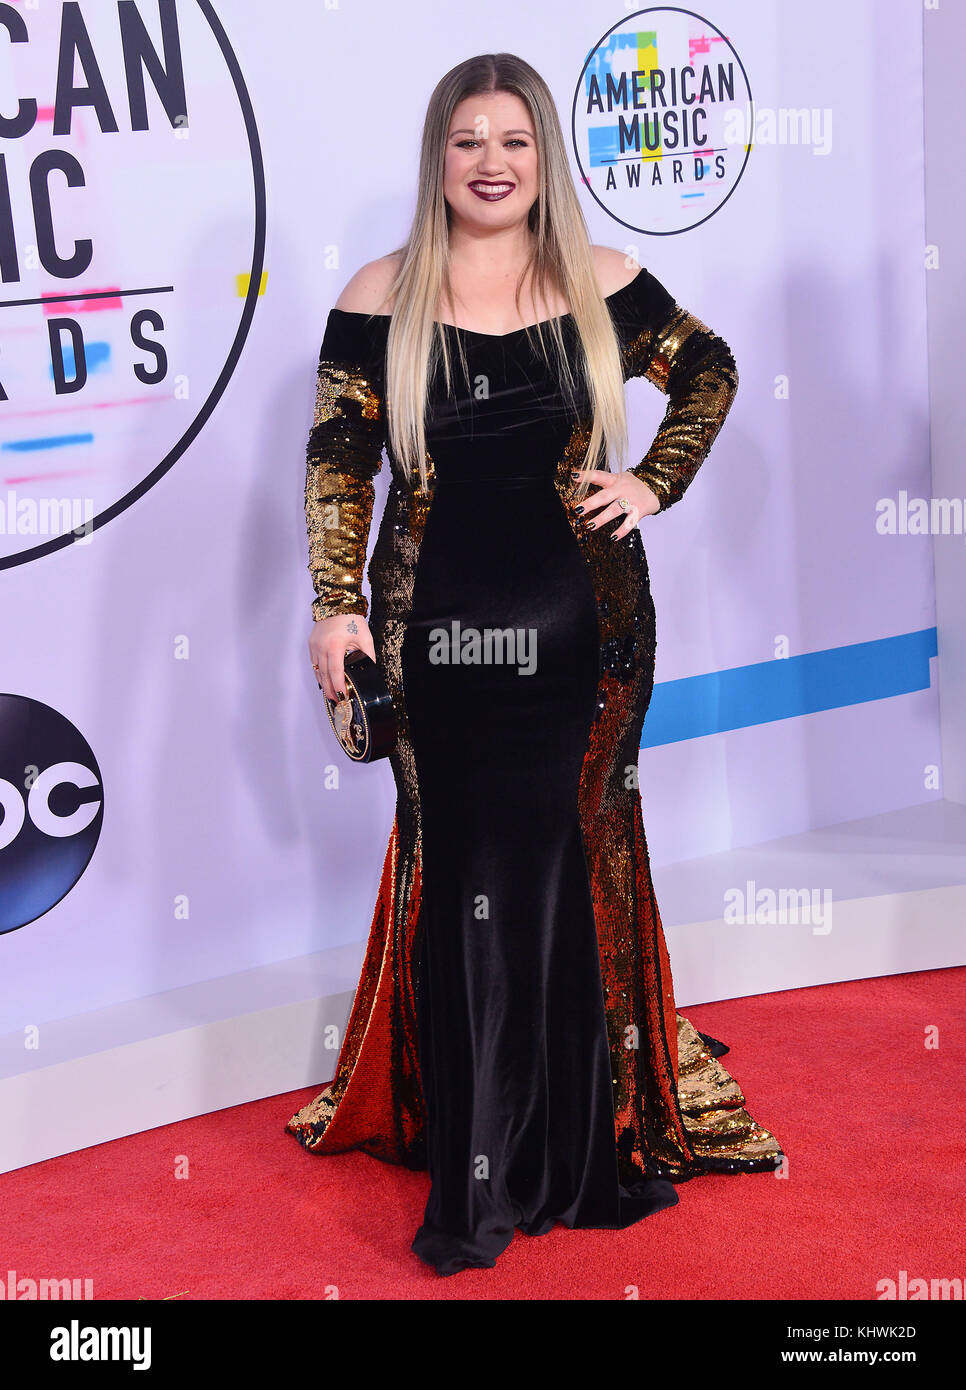 Los Angeles, USA. 19th Nov, 2017. Kelly Clarkson 180 arrives at the 2017 American Music Awards at Microsoft Theater on November 19, 2017 in Los Angeles, California Credit: Tsuni/USA/Alamy Live News Stock Photo